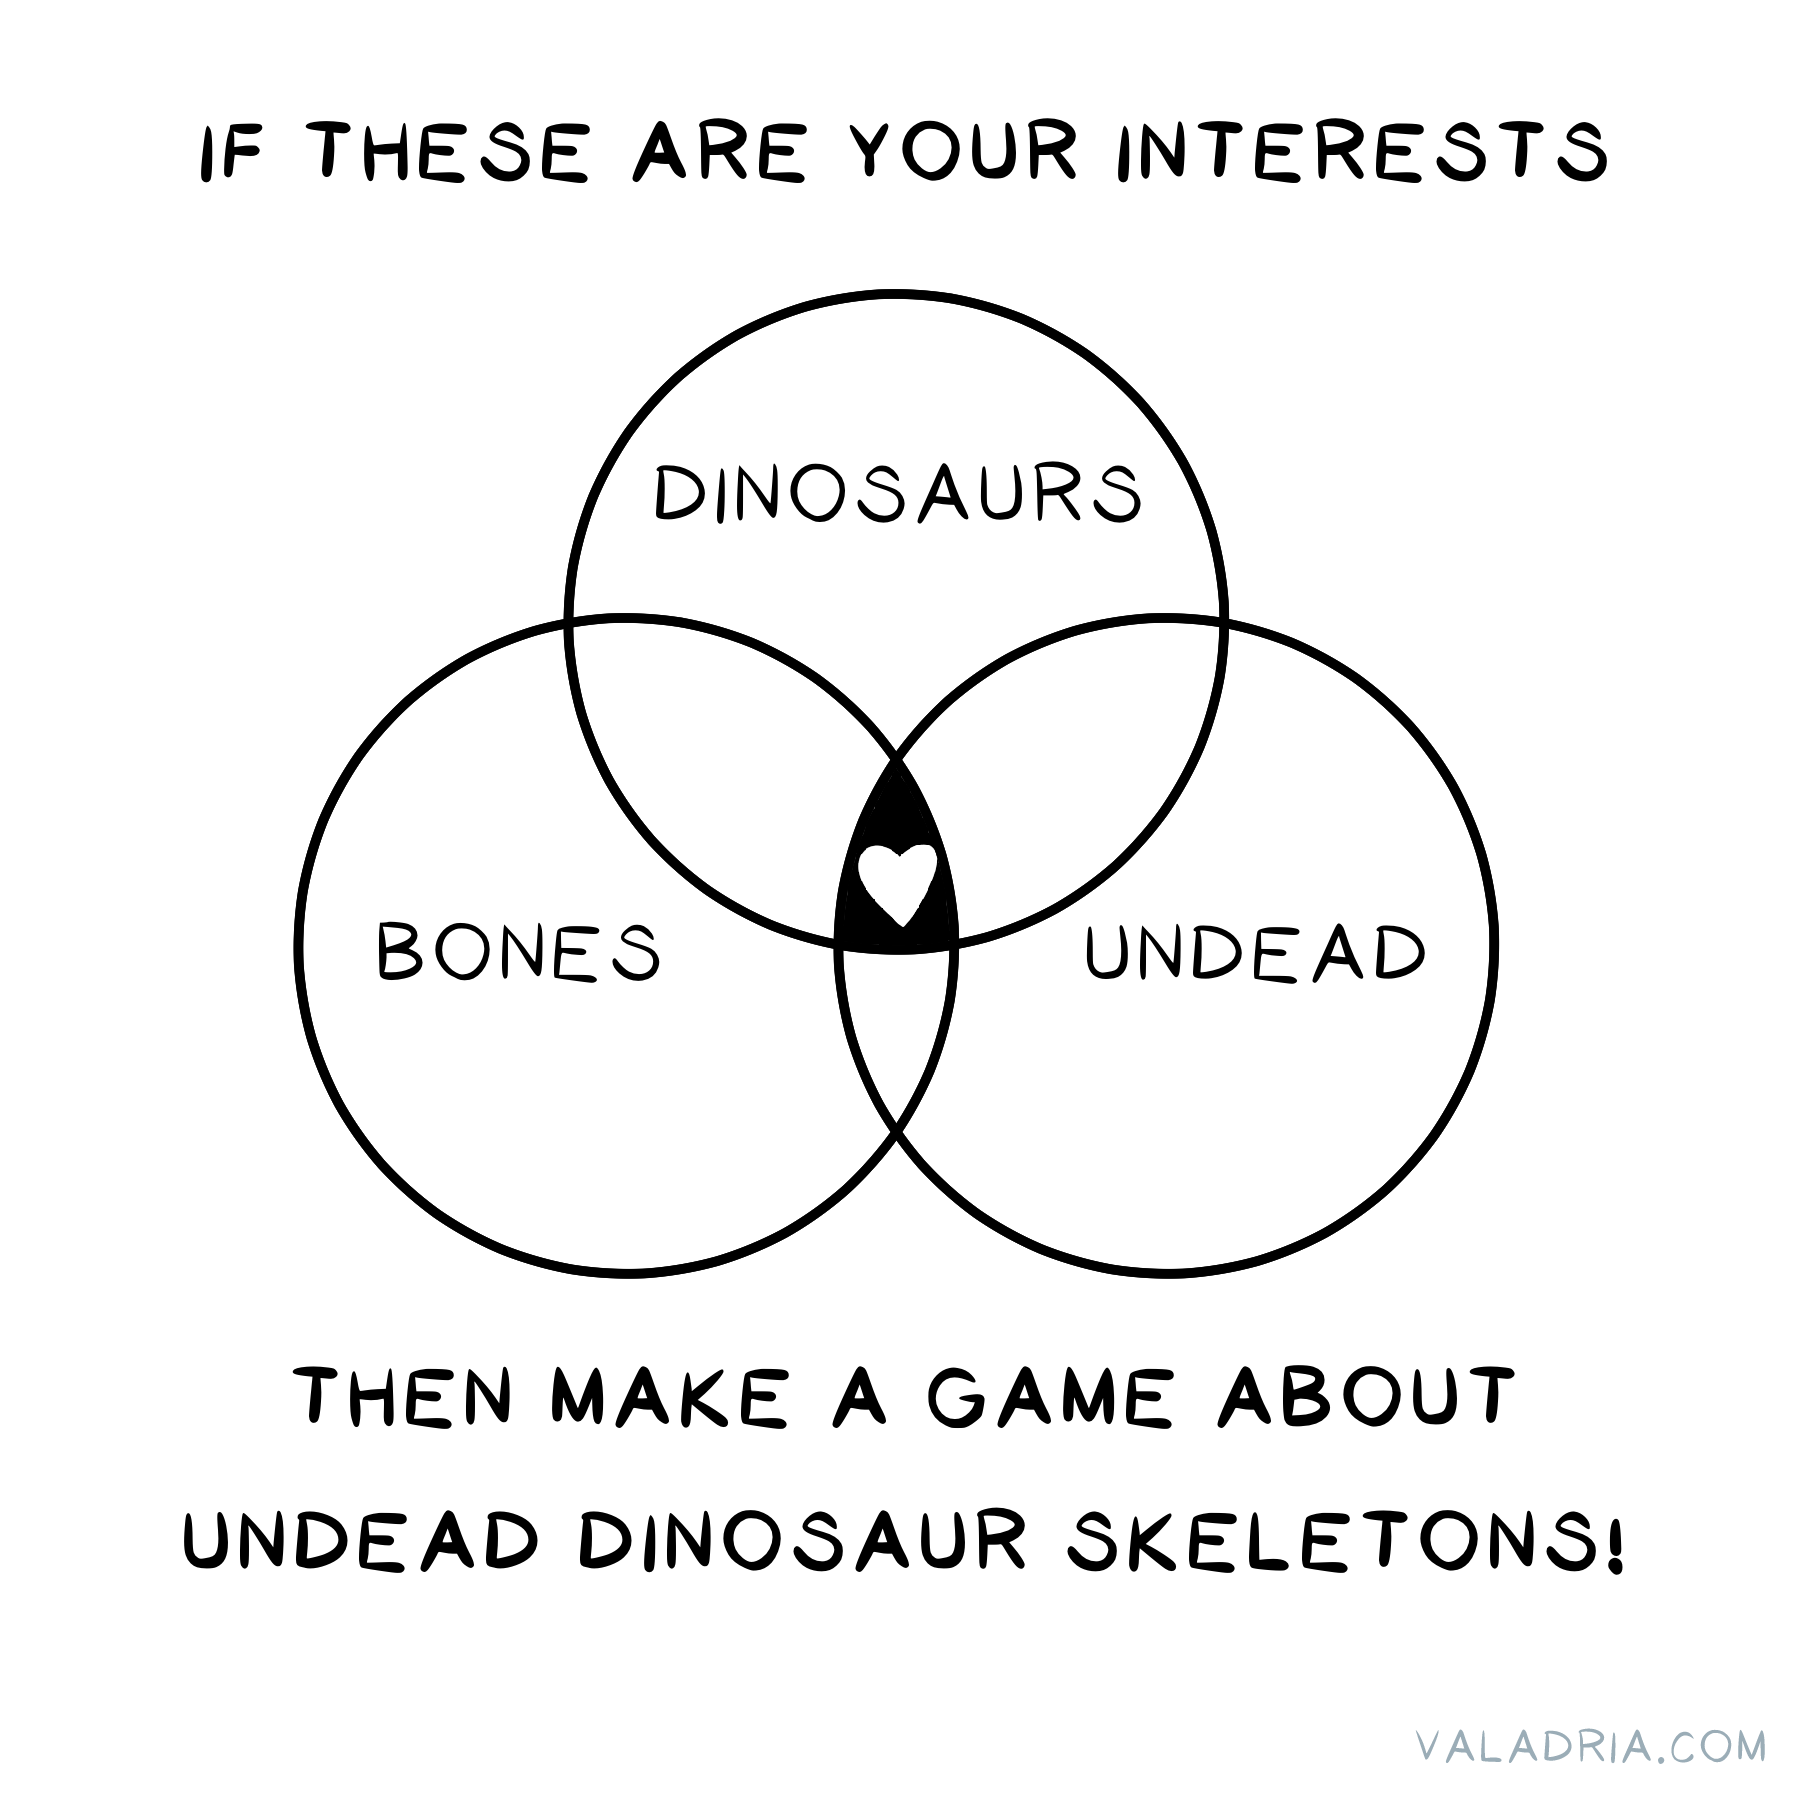 An illustration: 3 circles are labeled DINOSAURS, BONES, and UNDEAD. Where they overlap is a heart. The text above and below reads: "If these are your interests, then make a game about undead dinosaur skeletons!"